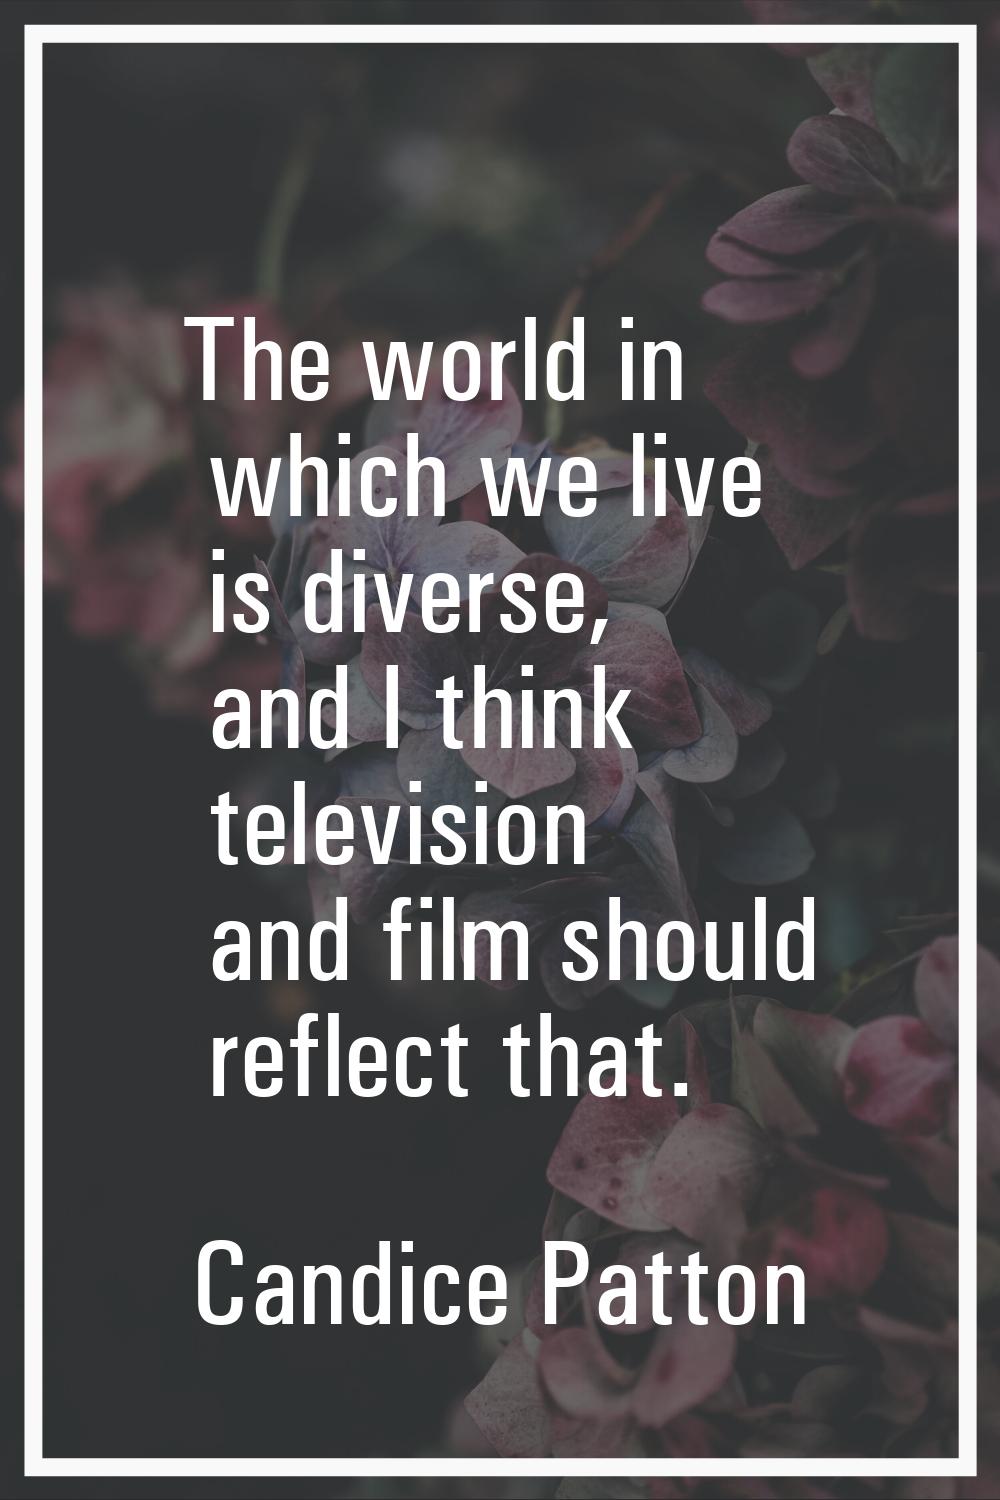 The world in which we live is diverse, and I think television and film should reflect that.